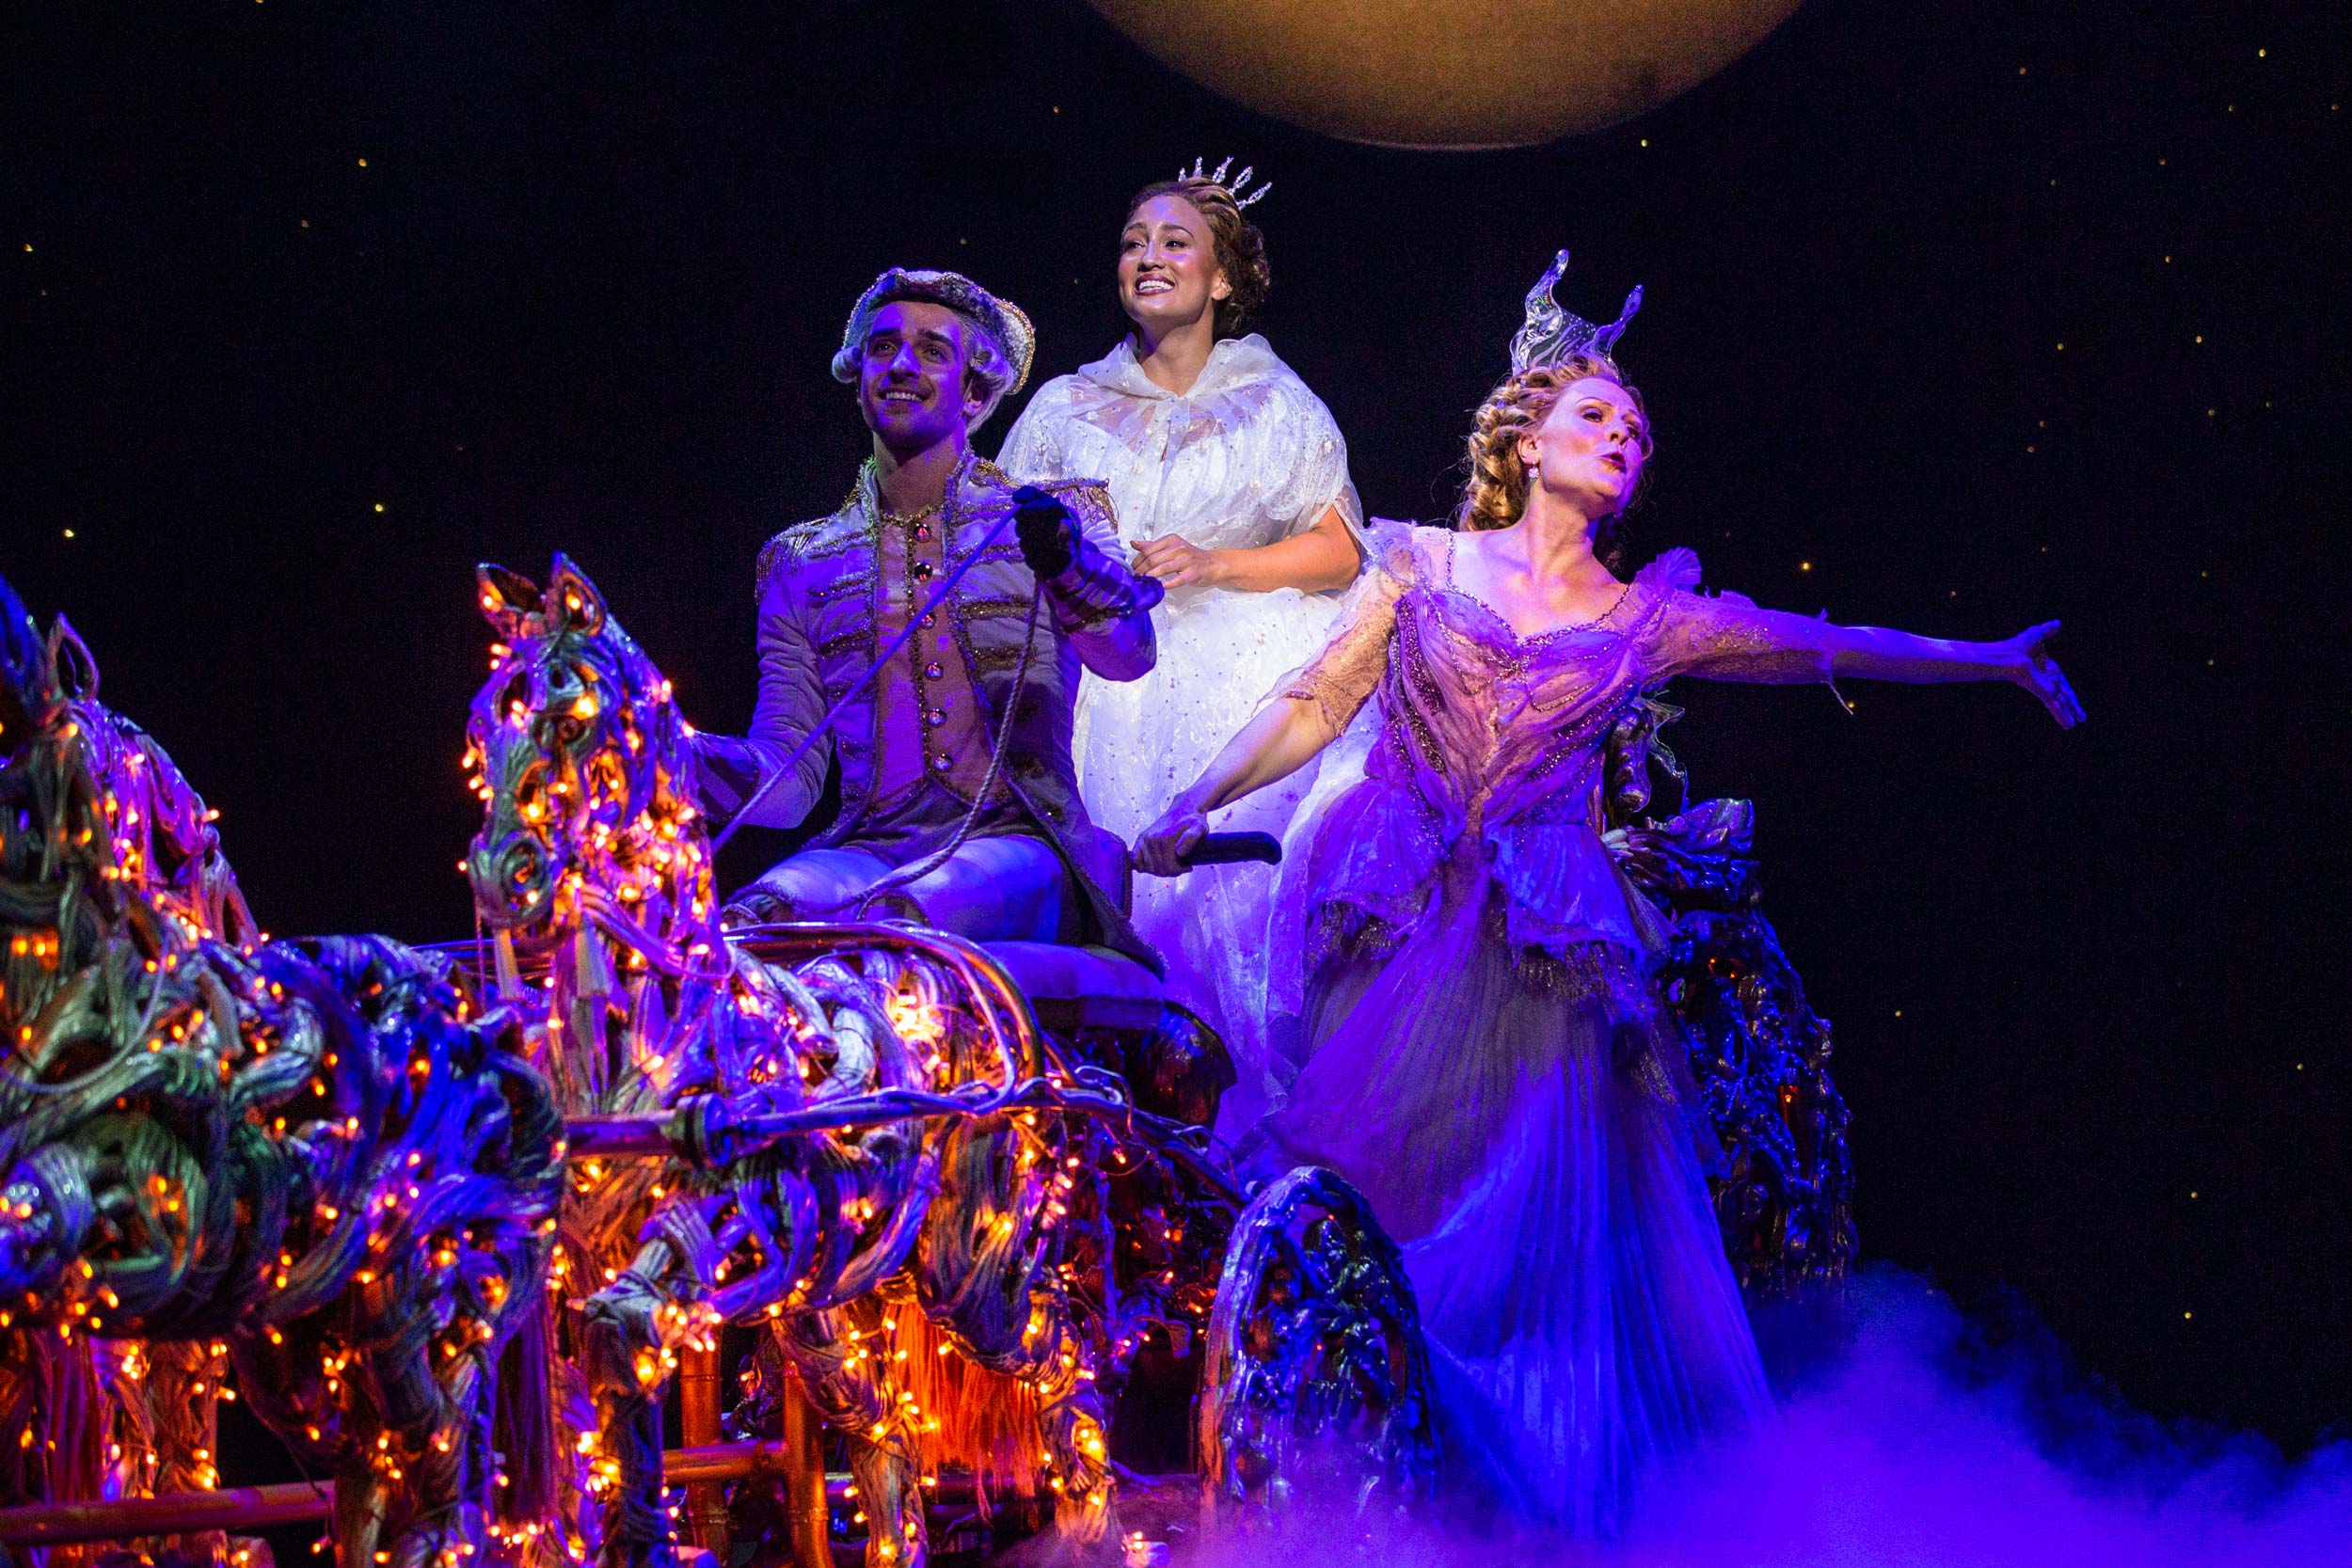 A photo from the 2019 Paper Mill Playhouse production of Cinderella.